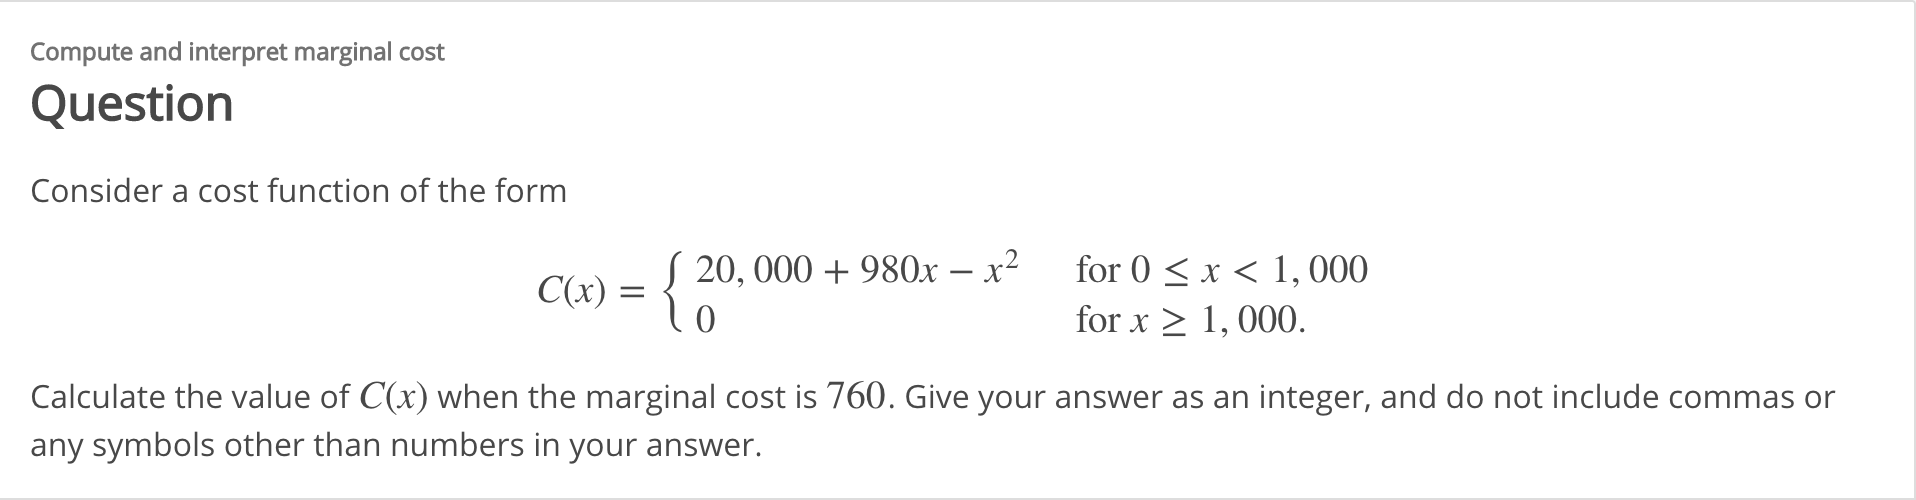 Compute and interpret marginal cost
Question
Consider a cost function of the form
for 0 <x < 1,000
C(x) = { 20, 000 + 980x – x²
for x > 1, 000.
Calculate the value of C(x) when the marginal cost is 760. Give your answer as an integer, and do not include commas or
any symbols other than numbers in your answer.
